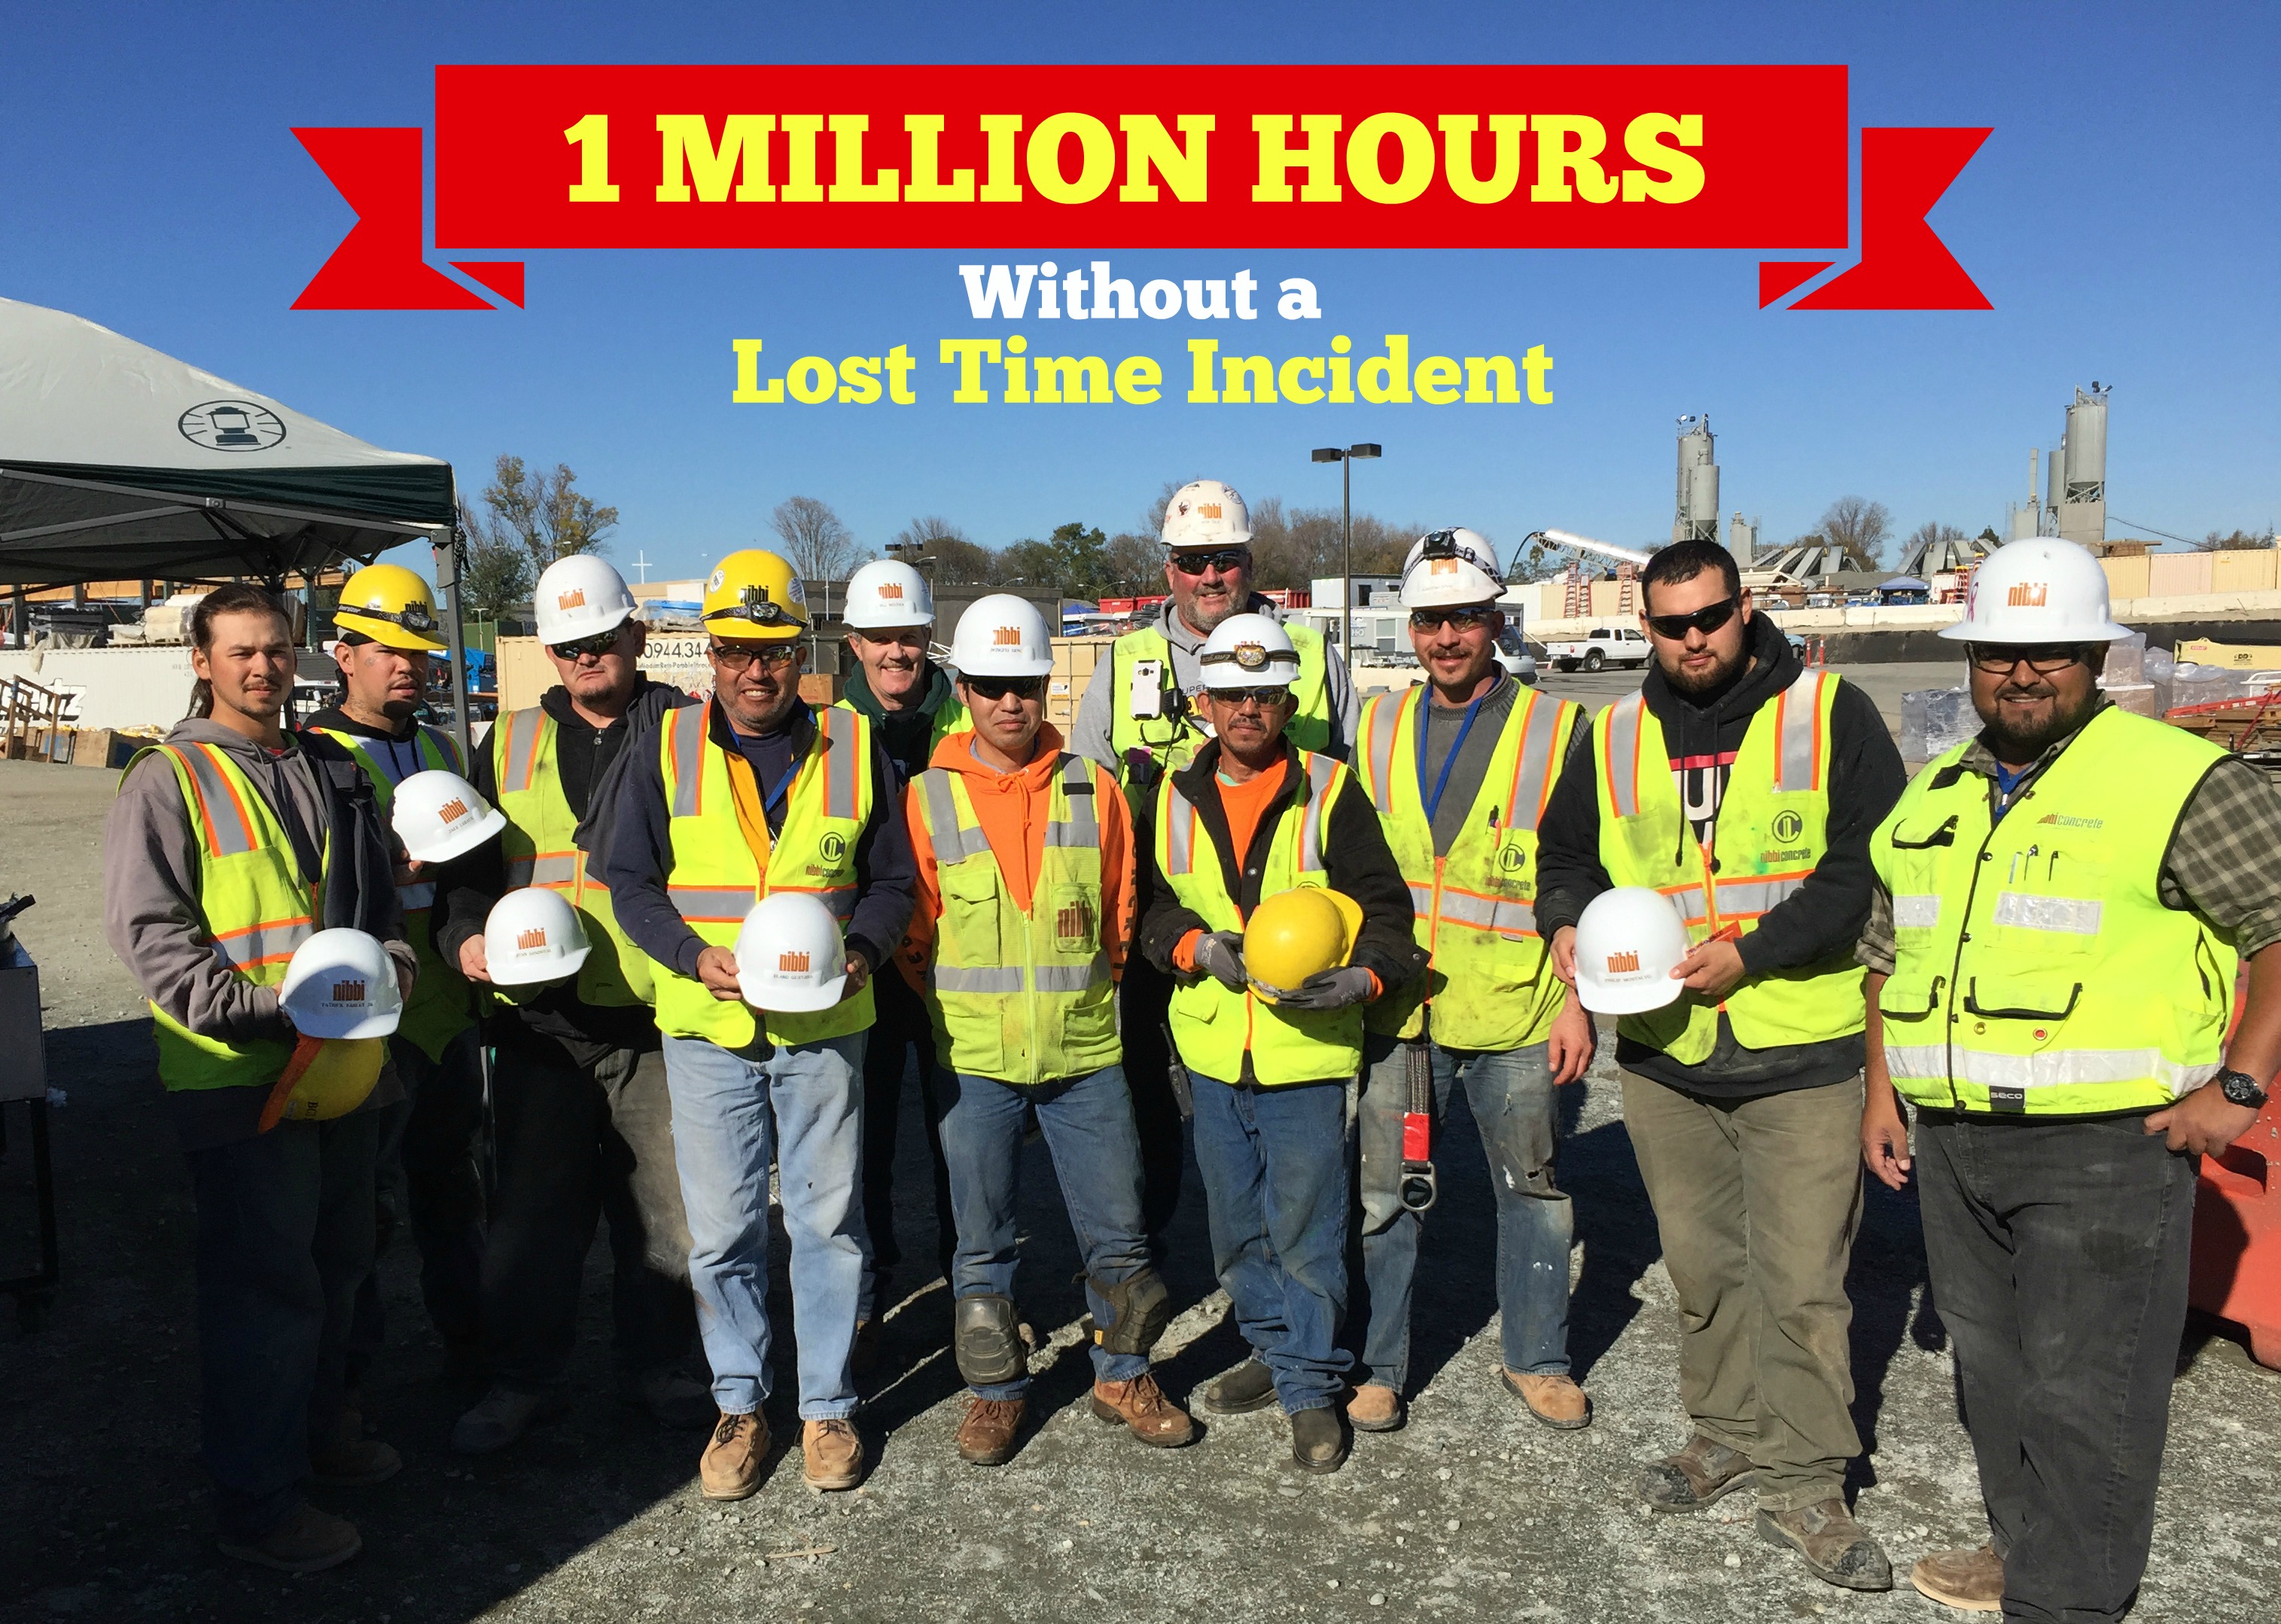 Celebrating 1 Million Hours Without a Lost Time Incident